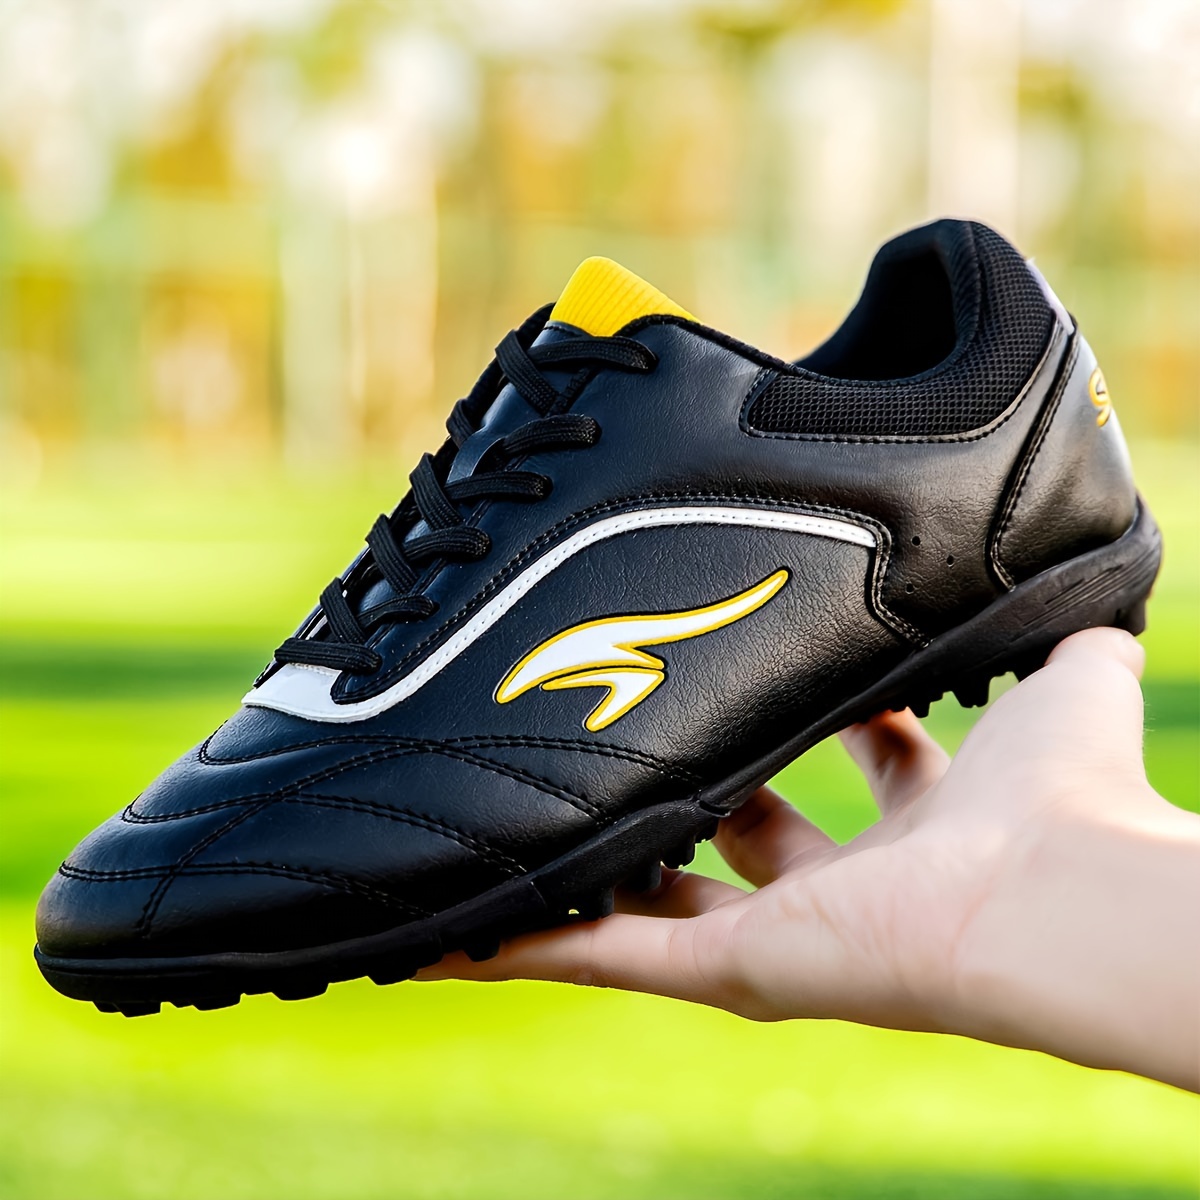 

Unisex Professional Soccer Cleats - Anti-slip, Breathable Tf Turf Football Shoes For Training & Competition Soccer Shoes Soccer Gear